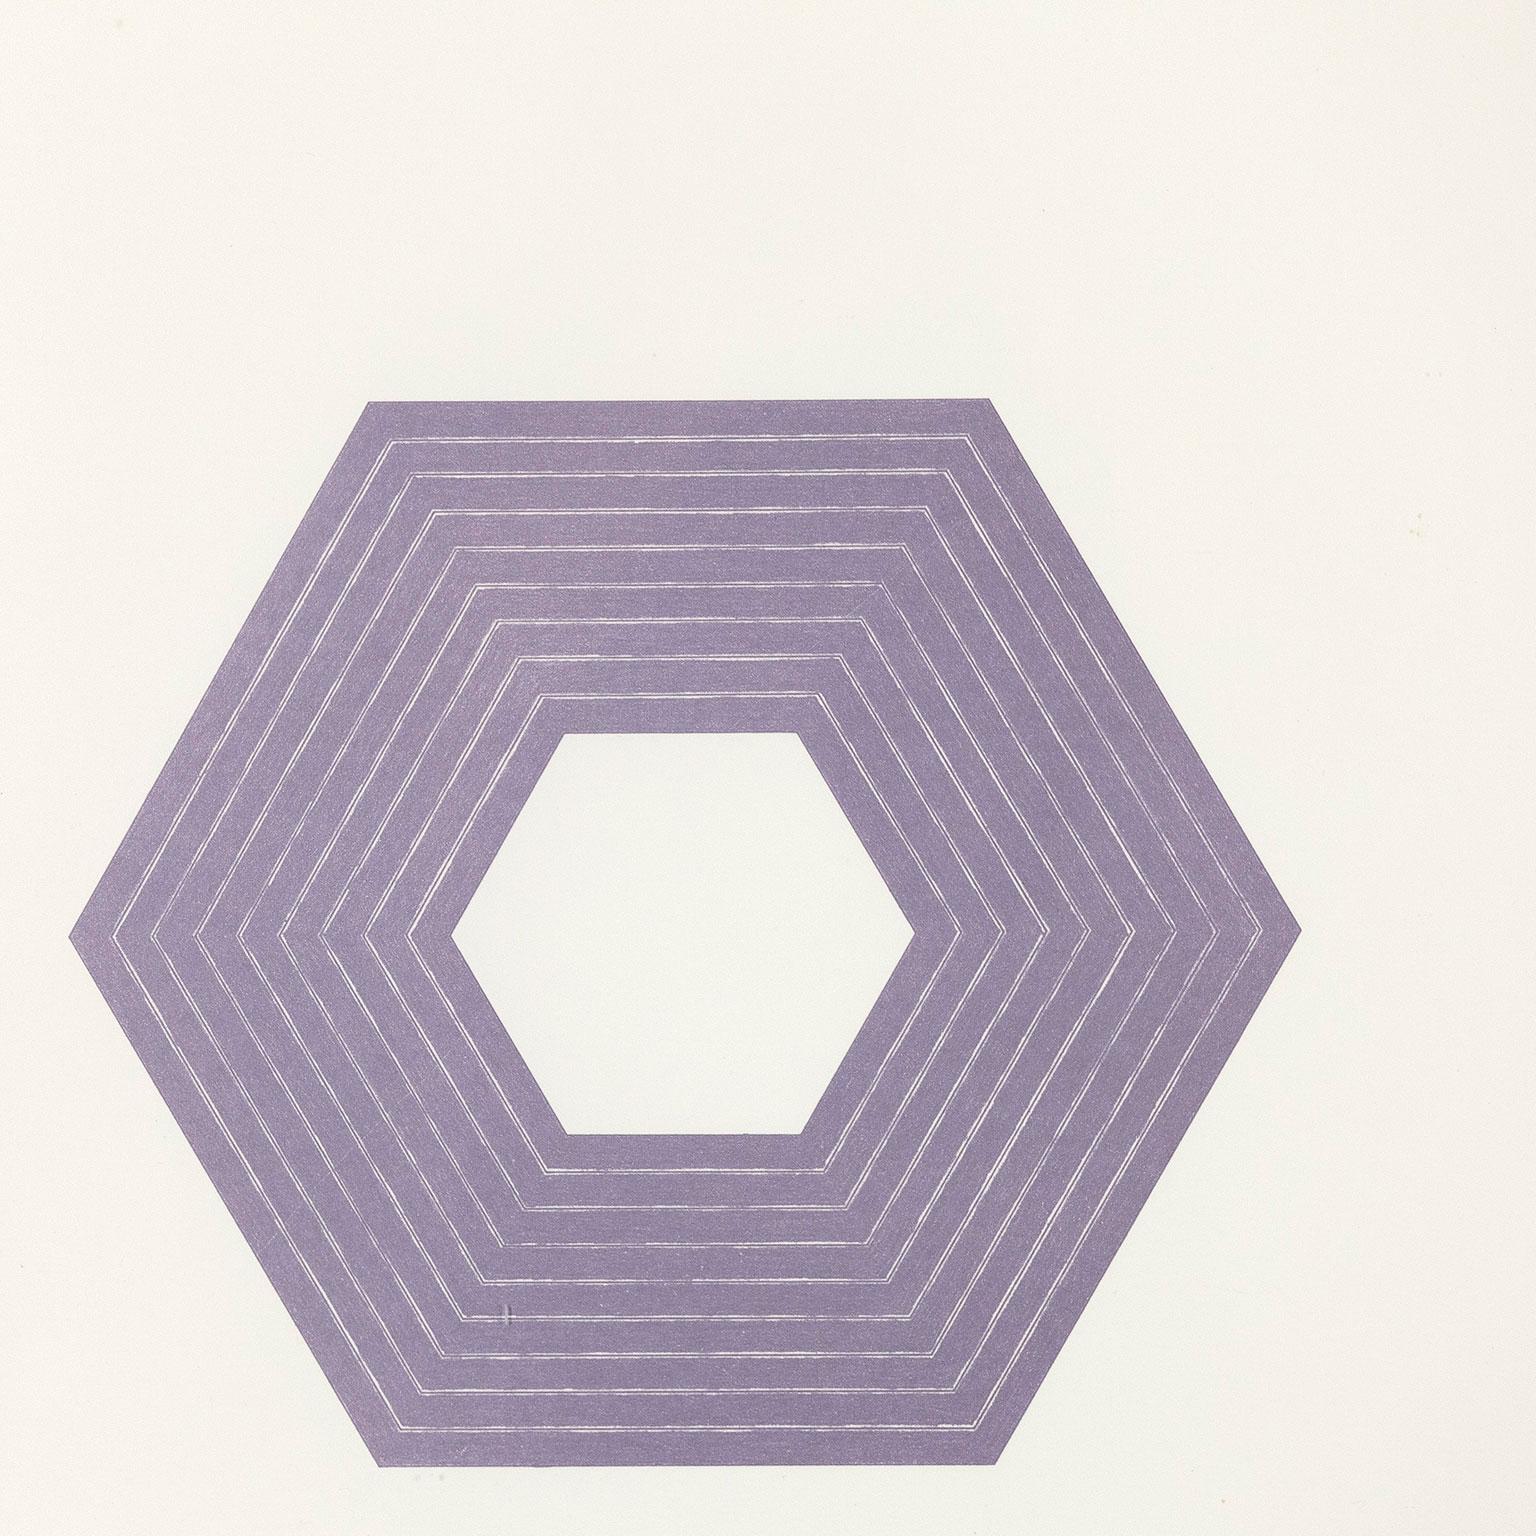 Frank Stella's work references many of the key developments or movements in post-war American painting; geometric abstraction, color field painting and Minimalism.

The prints that made up the "Purple Series" each bear the name of an individual from